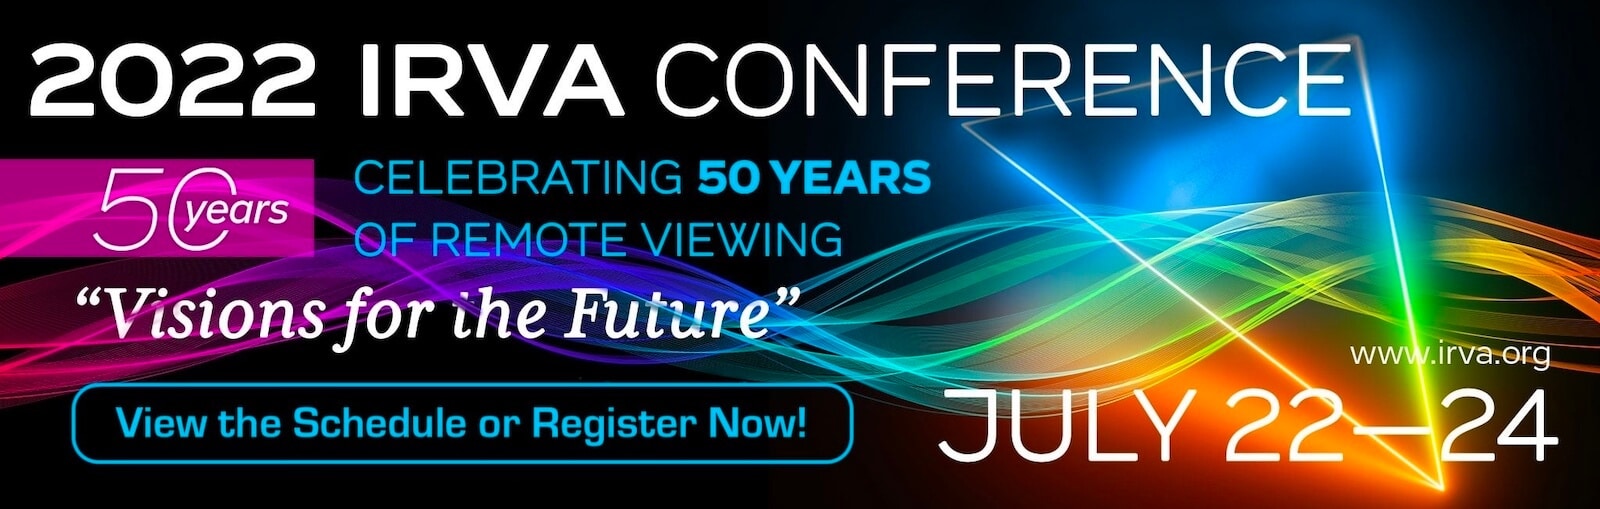 IRVA 2022 Remote Viewing Conference Registration Link